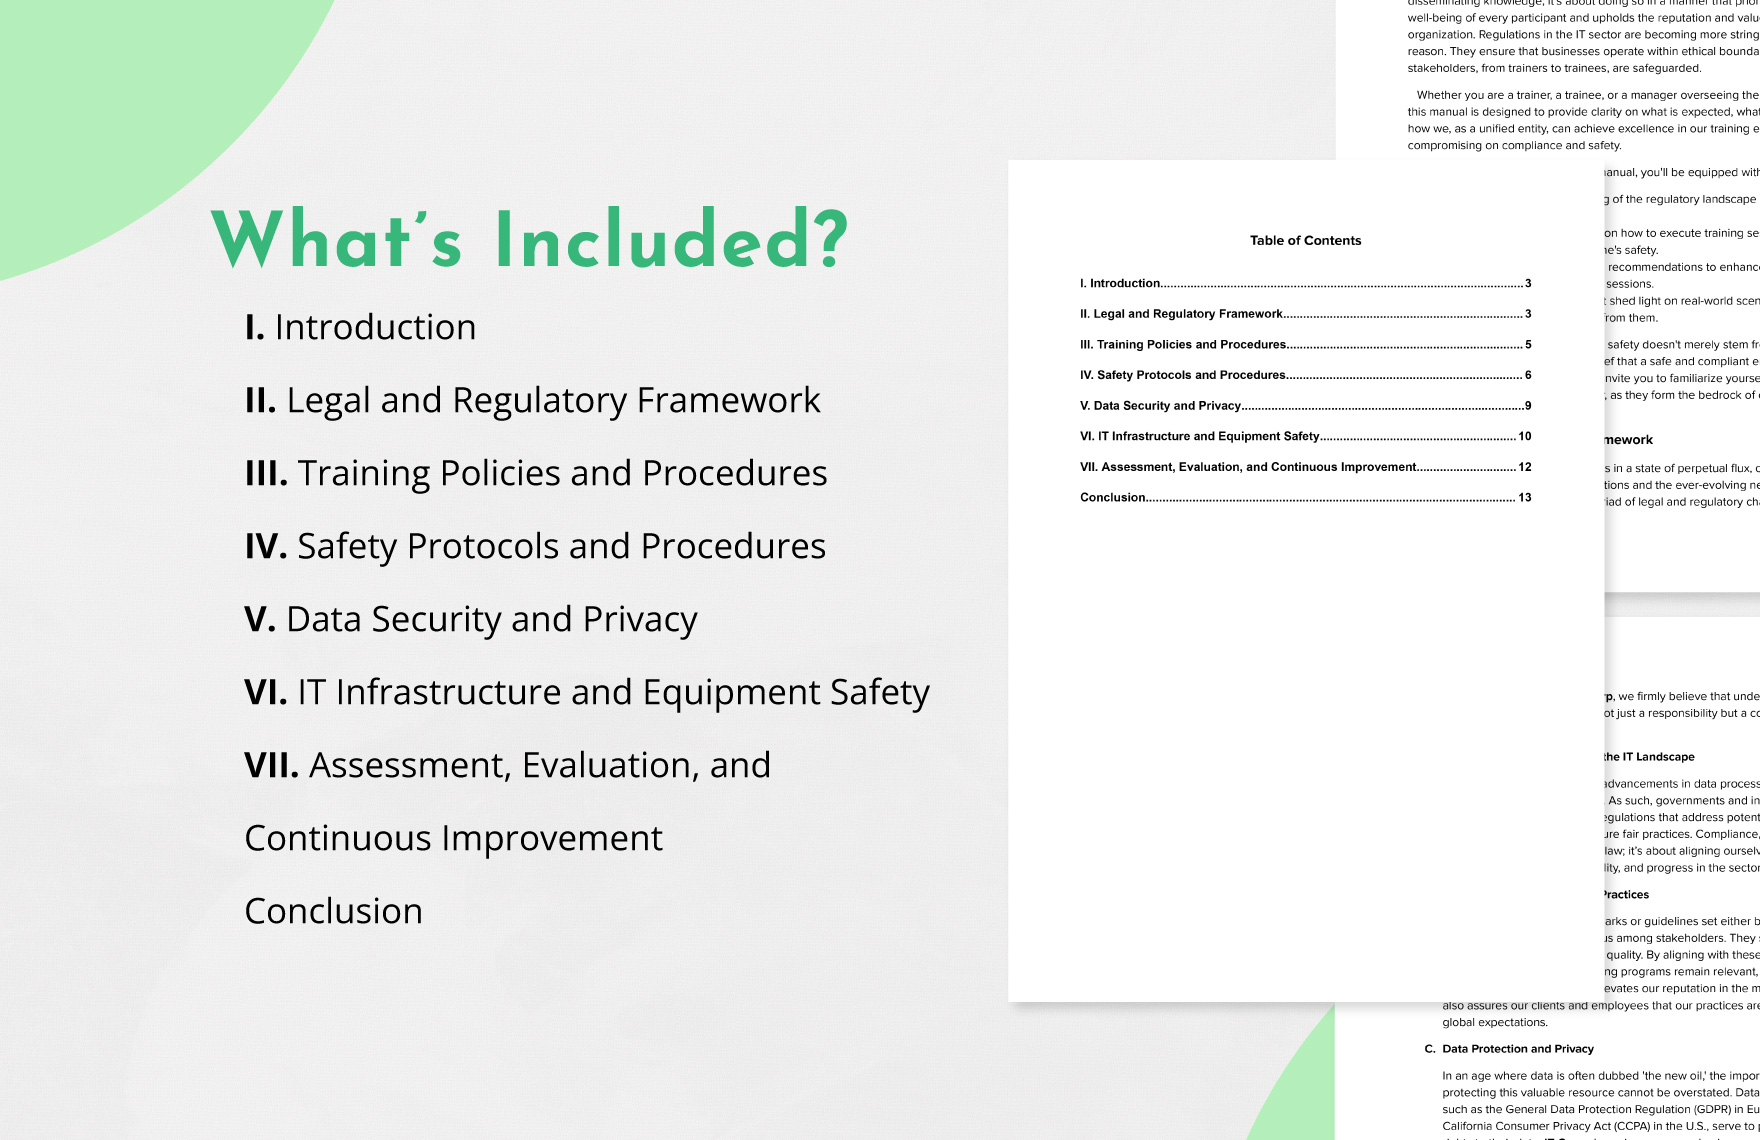 IT Training Compliance and Safety Manual Template